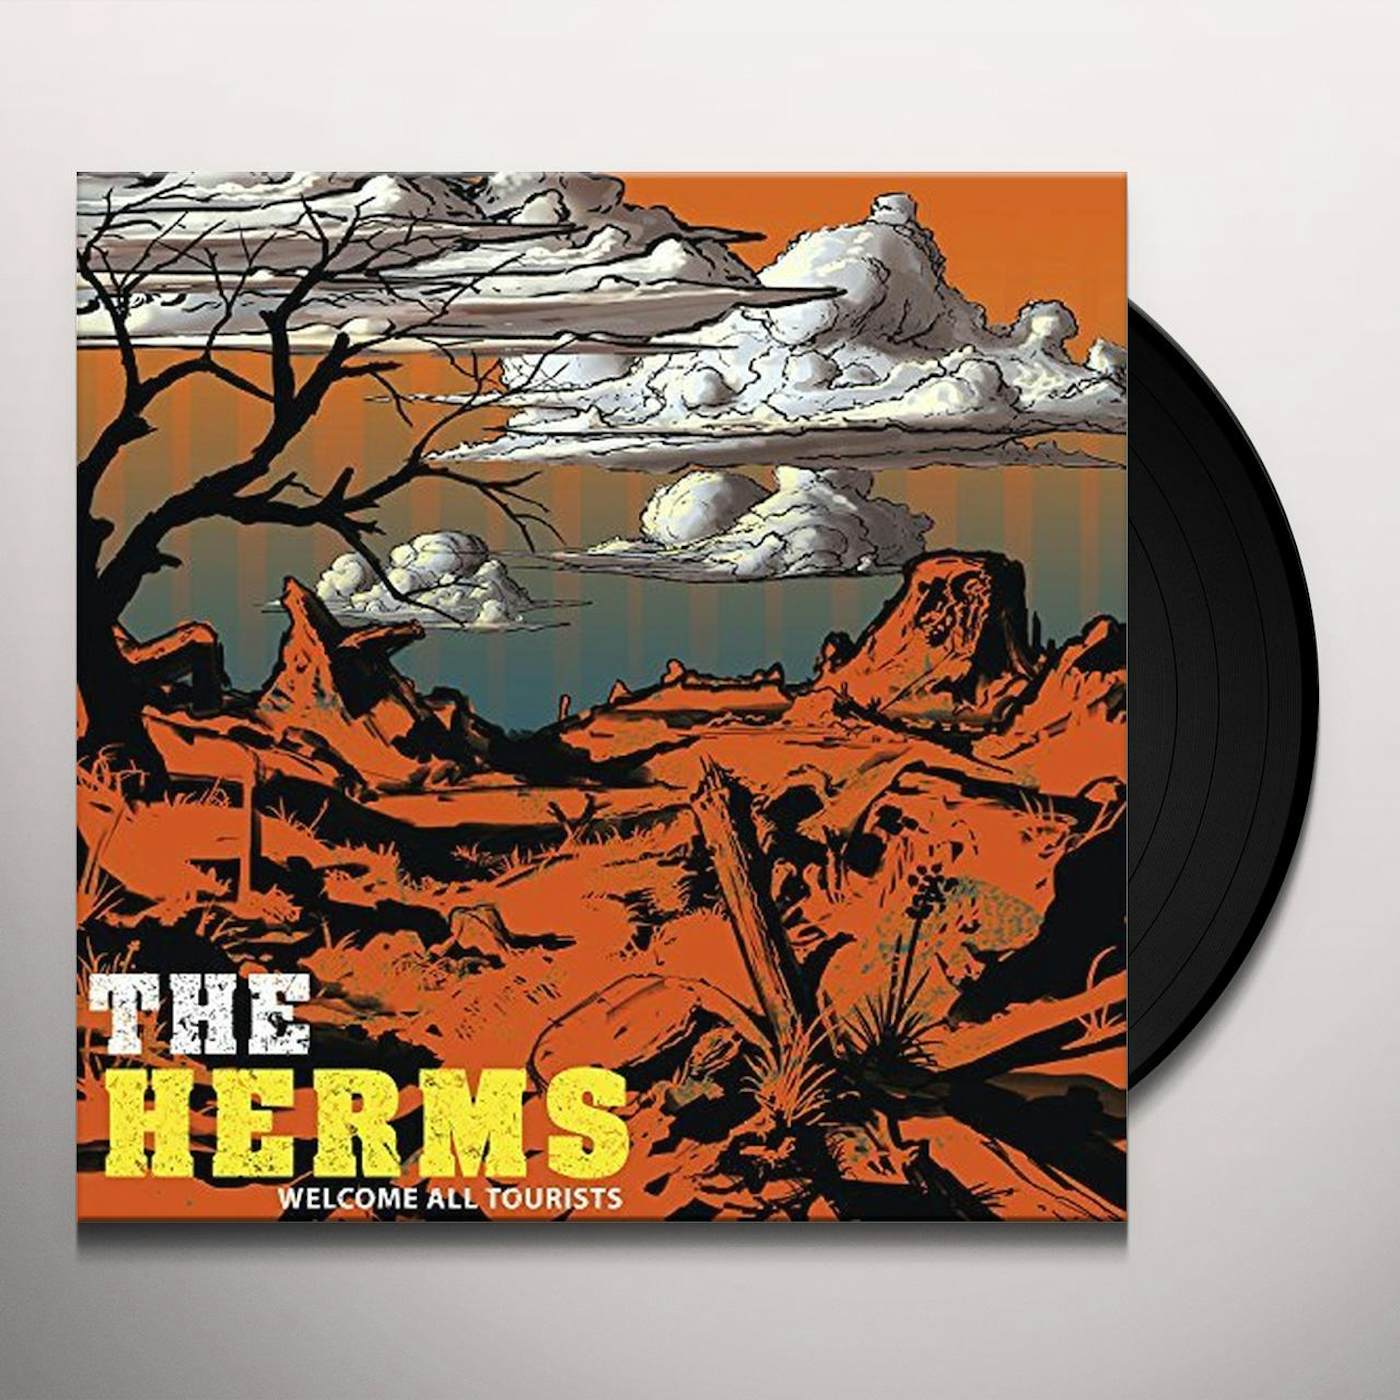 HERMS WELCOME ALL TOURISTS Vinyl Record